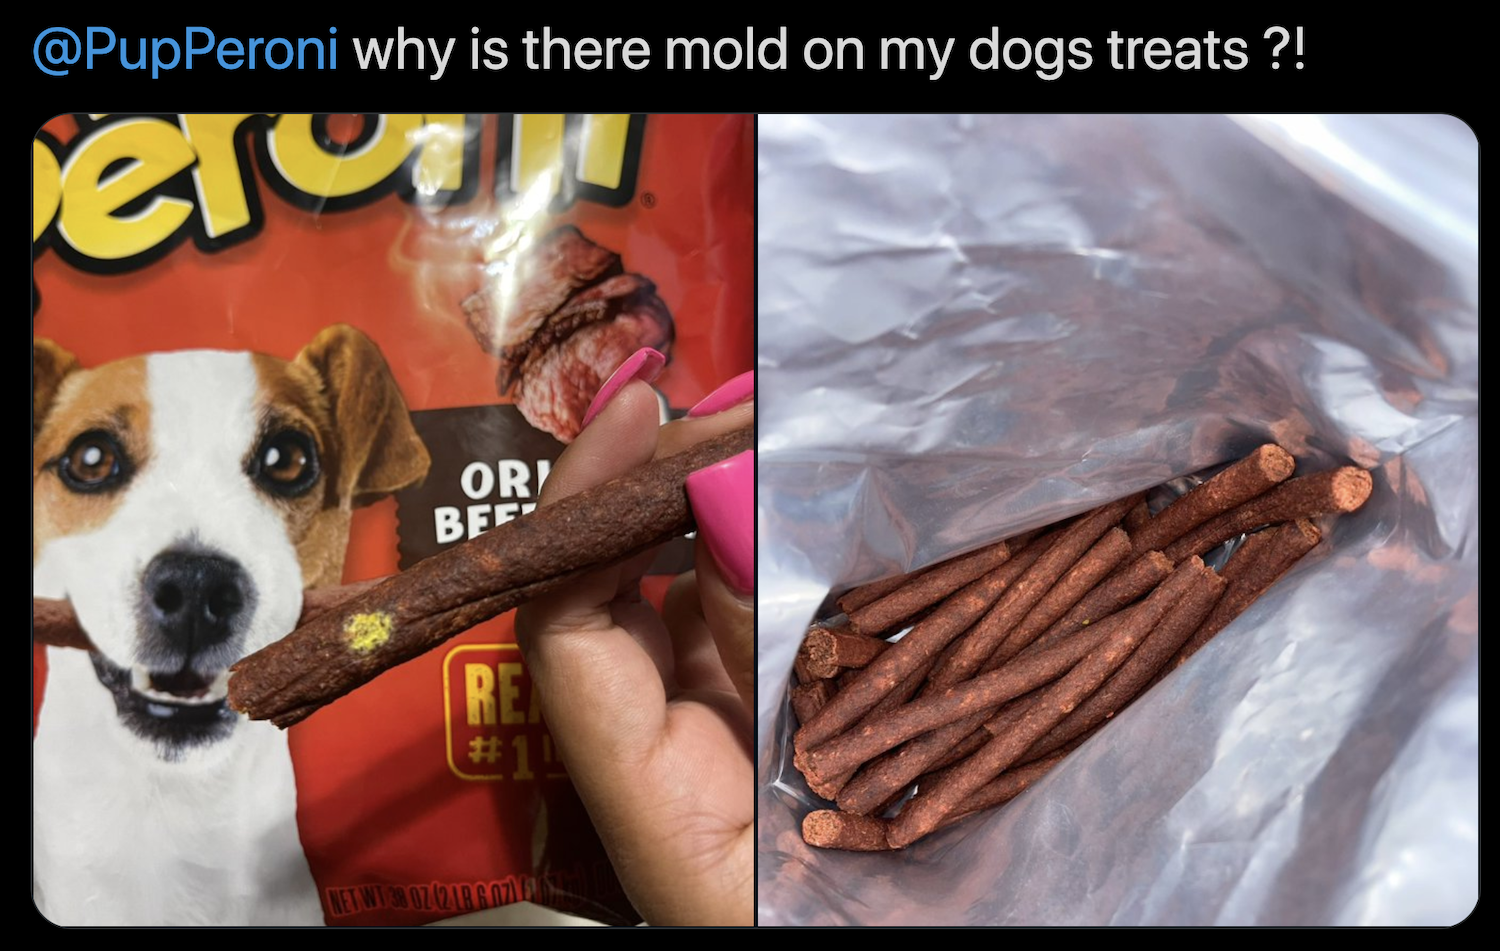 Photo from Twitter asking, Why is there mold on my dog's treats? Shows a package of Pup-Peroni in the background, and a woman's hand holding a moldy treat in front of it. It is next to a second photo of an open back of treats.